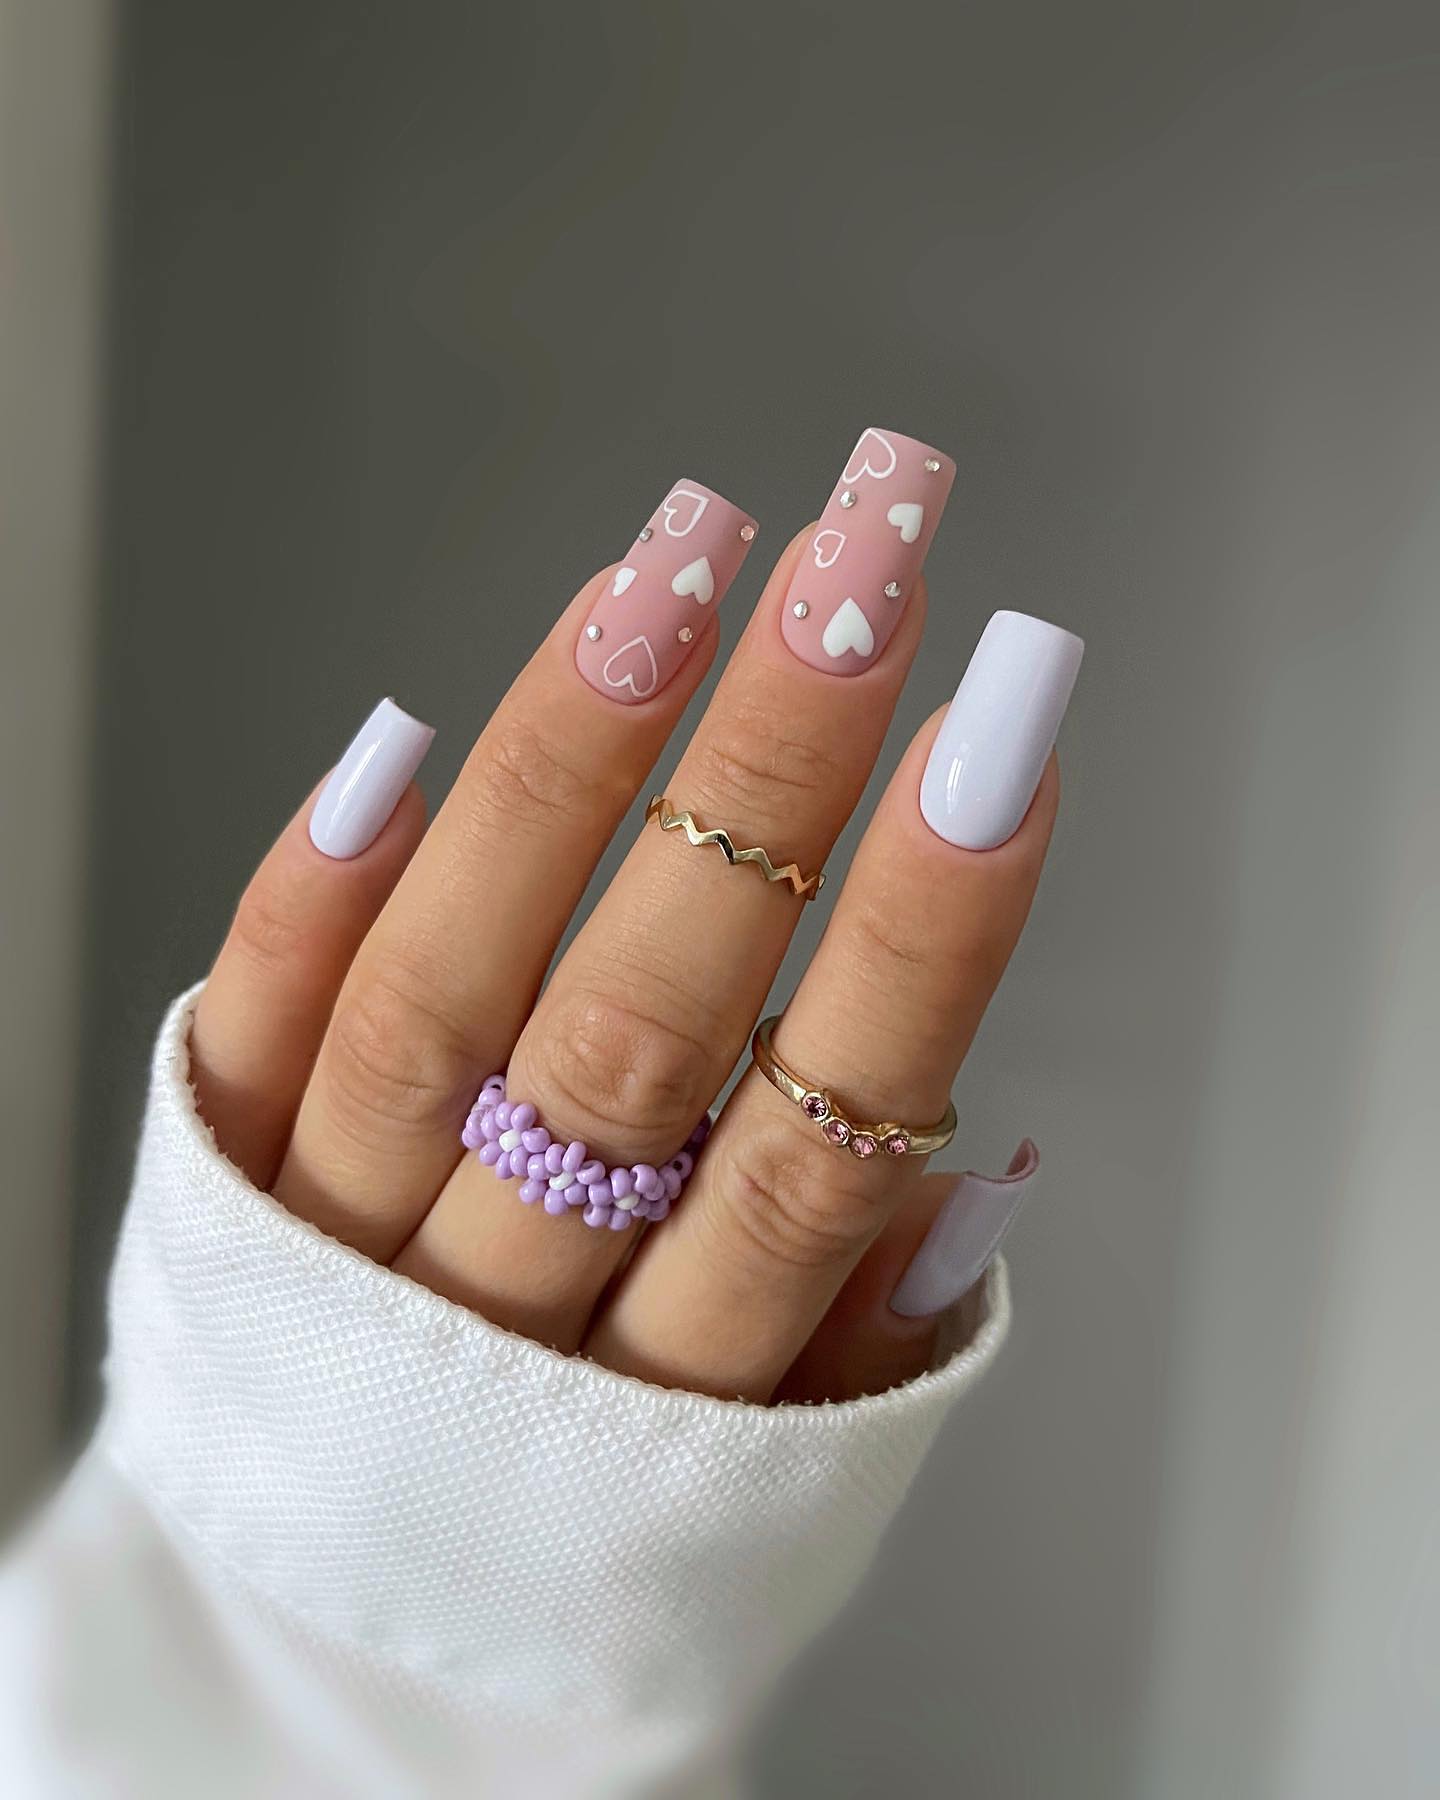 100+ Best Winter Nail Ideas And Designs To Try images 45